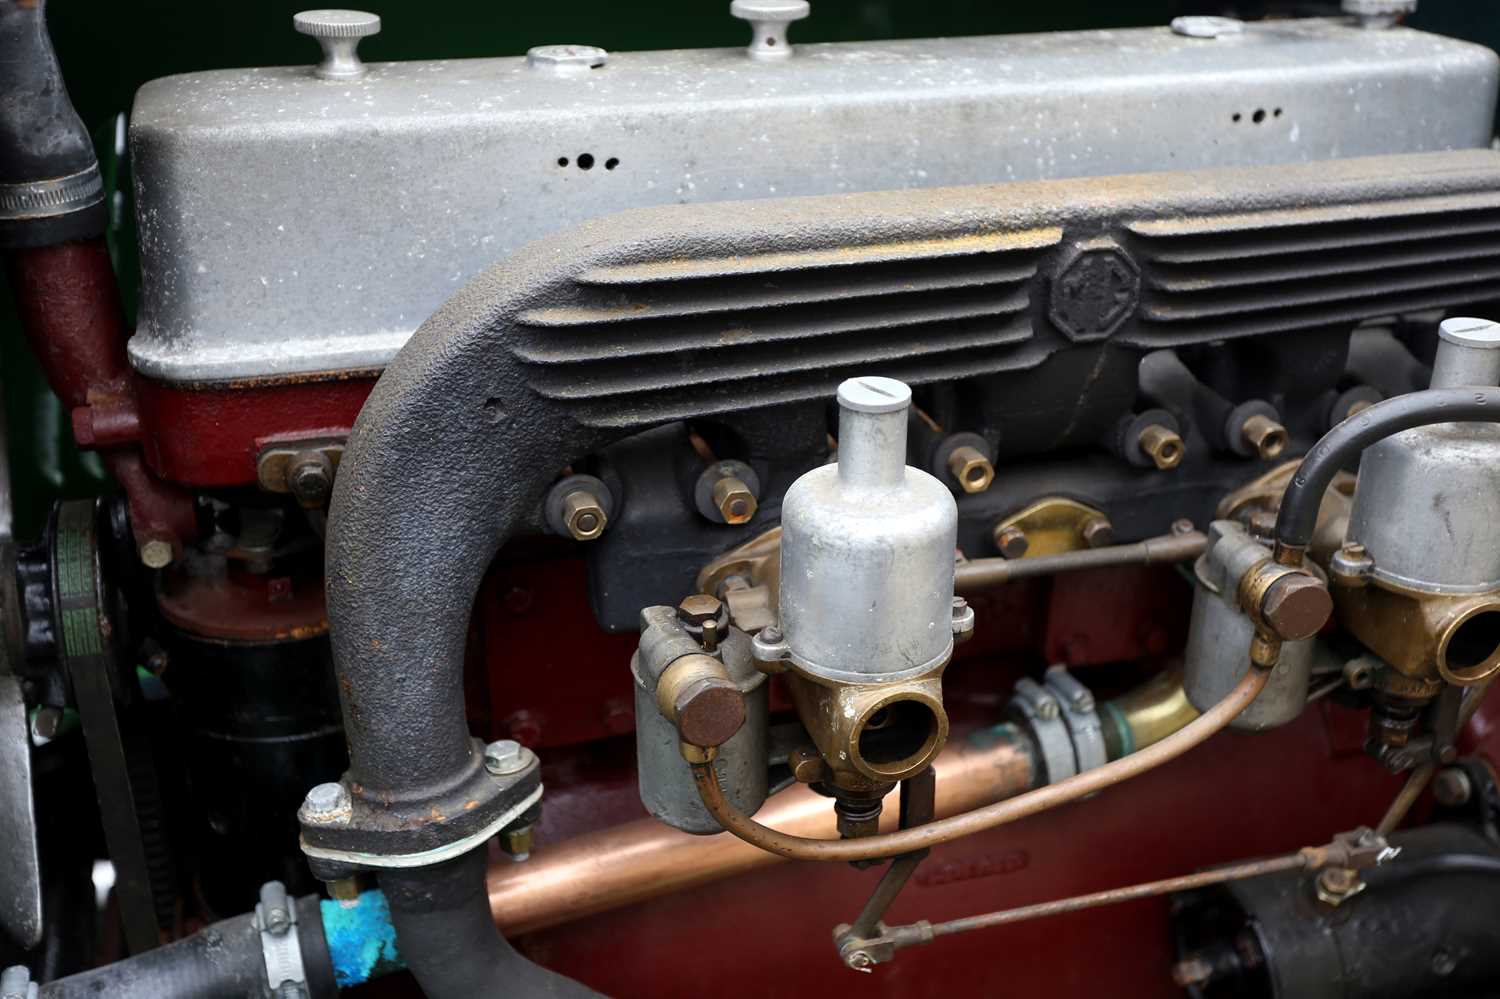 A 1932 MG F-Type Magna, GY 1698, converted from a two seater to a four seater and fully restored. - Image 19 of 21